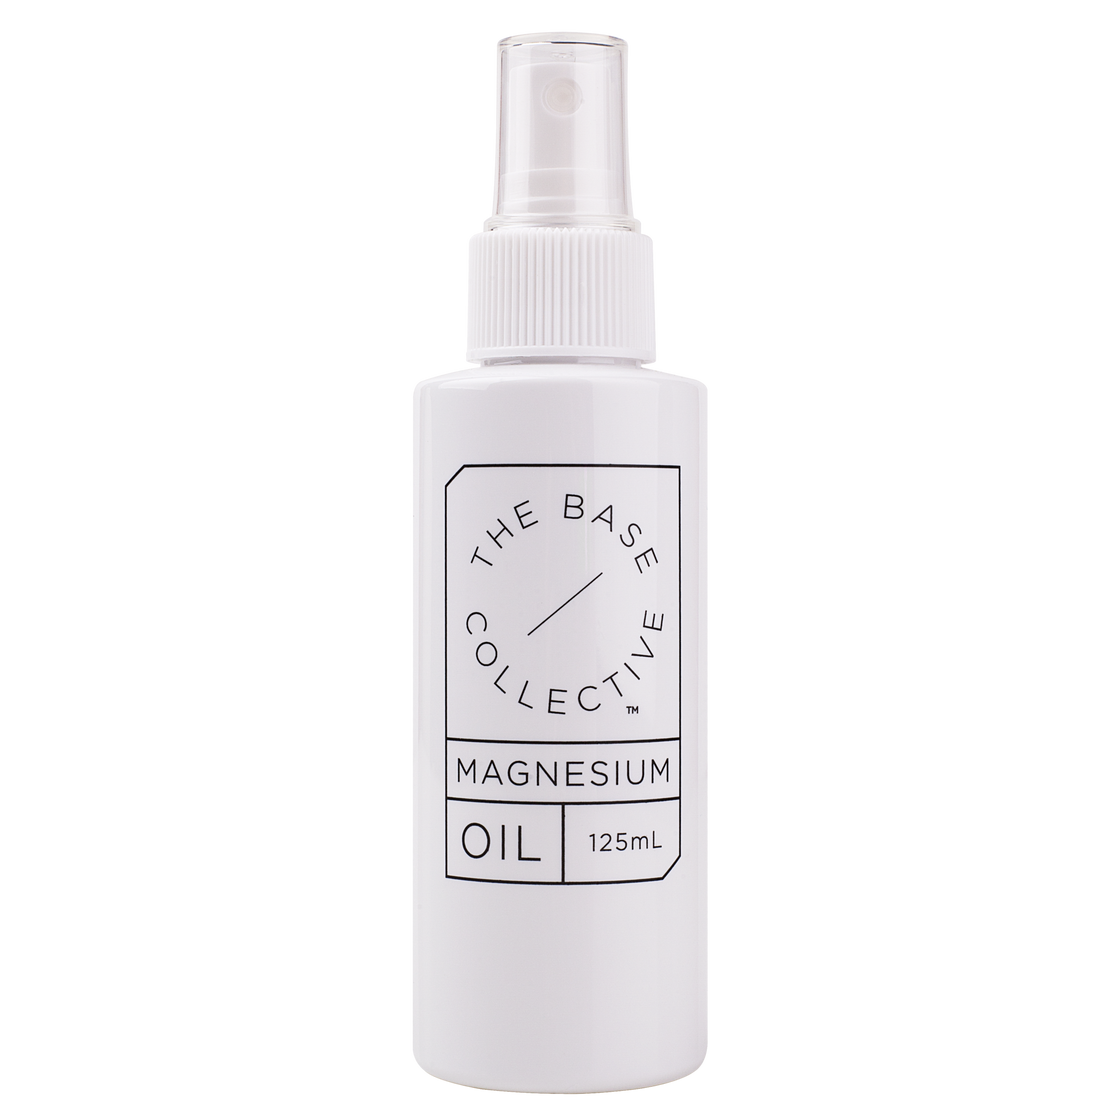 The_Base_Collective_organic_magnesium_oil_spray_1